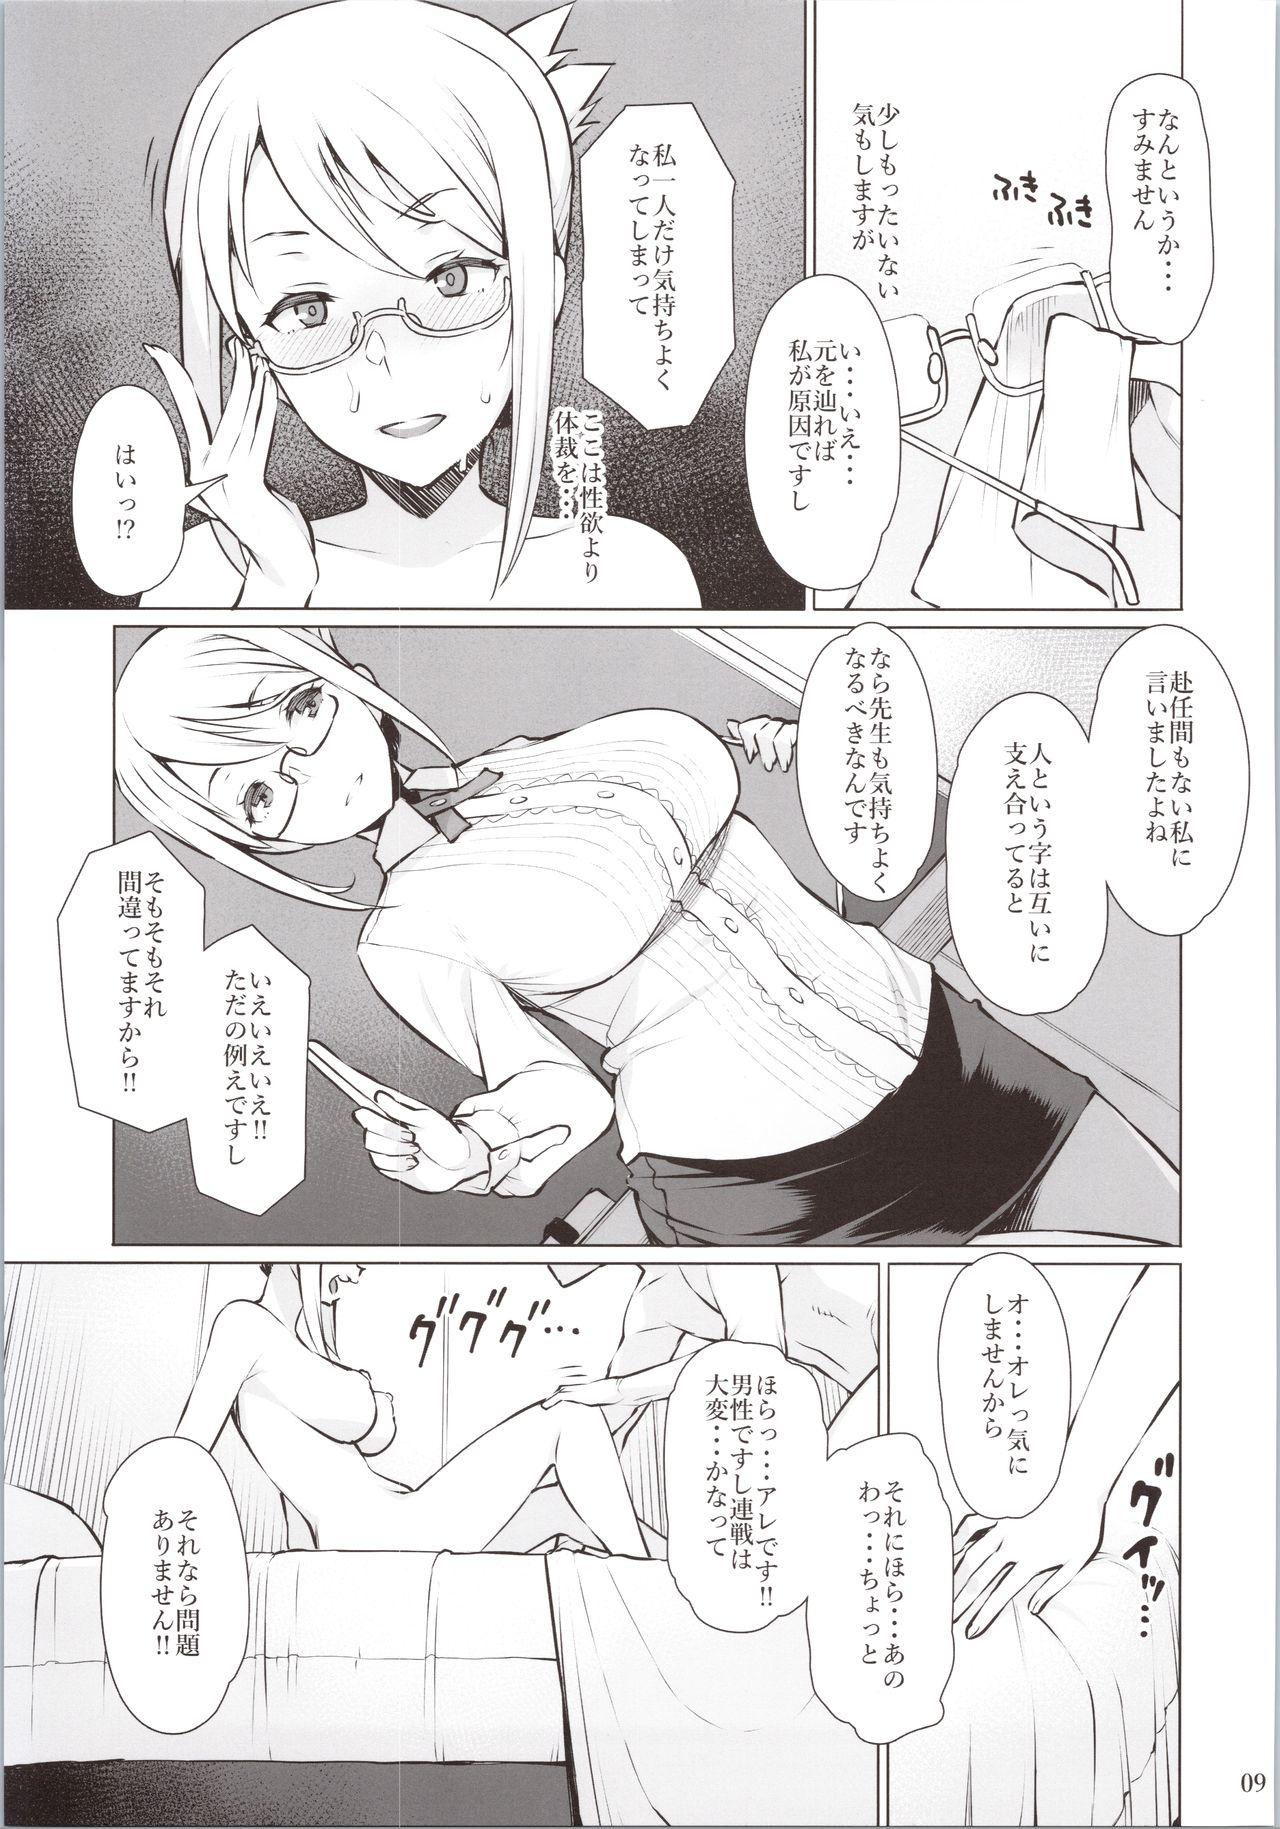 Fit Hito to shite - Schoolgirl strikers Dominant - Page 10